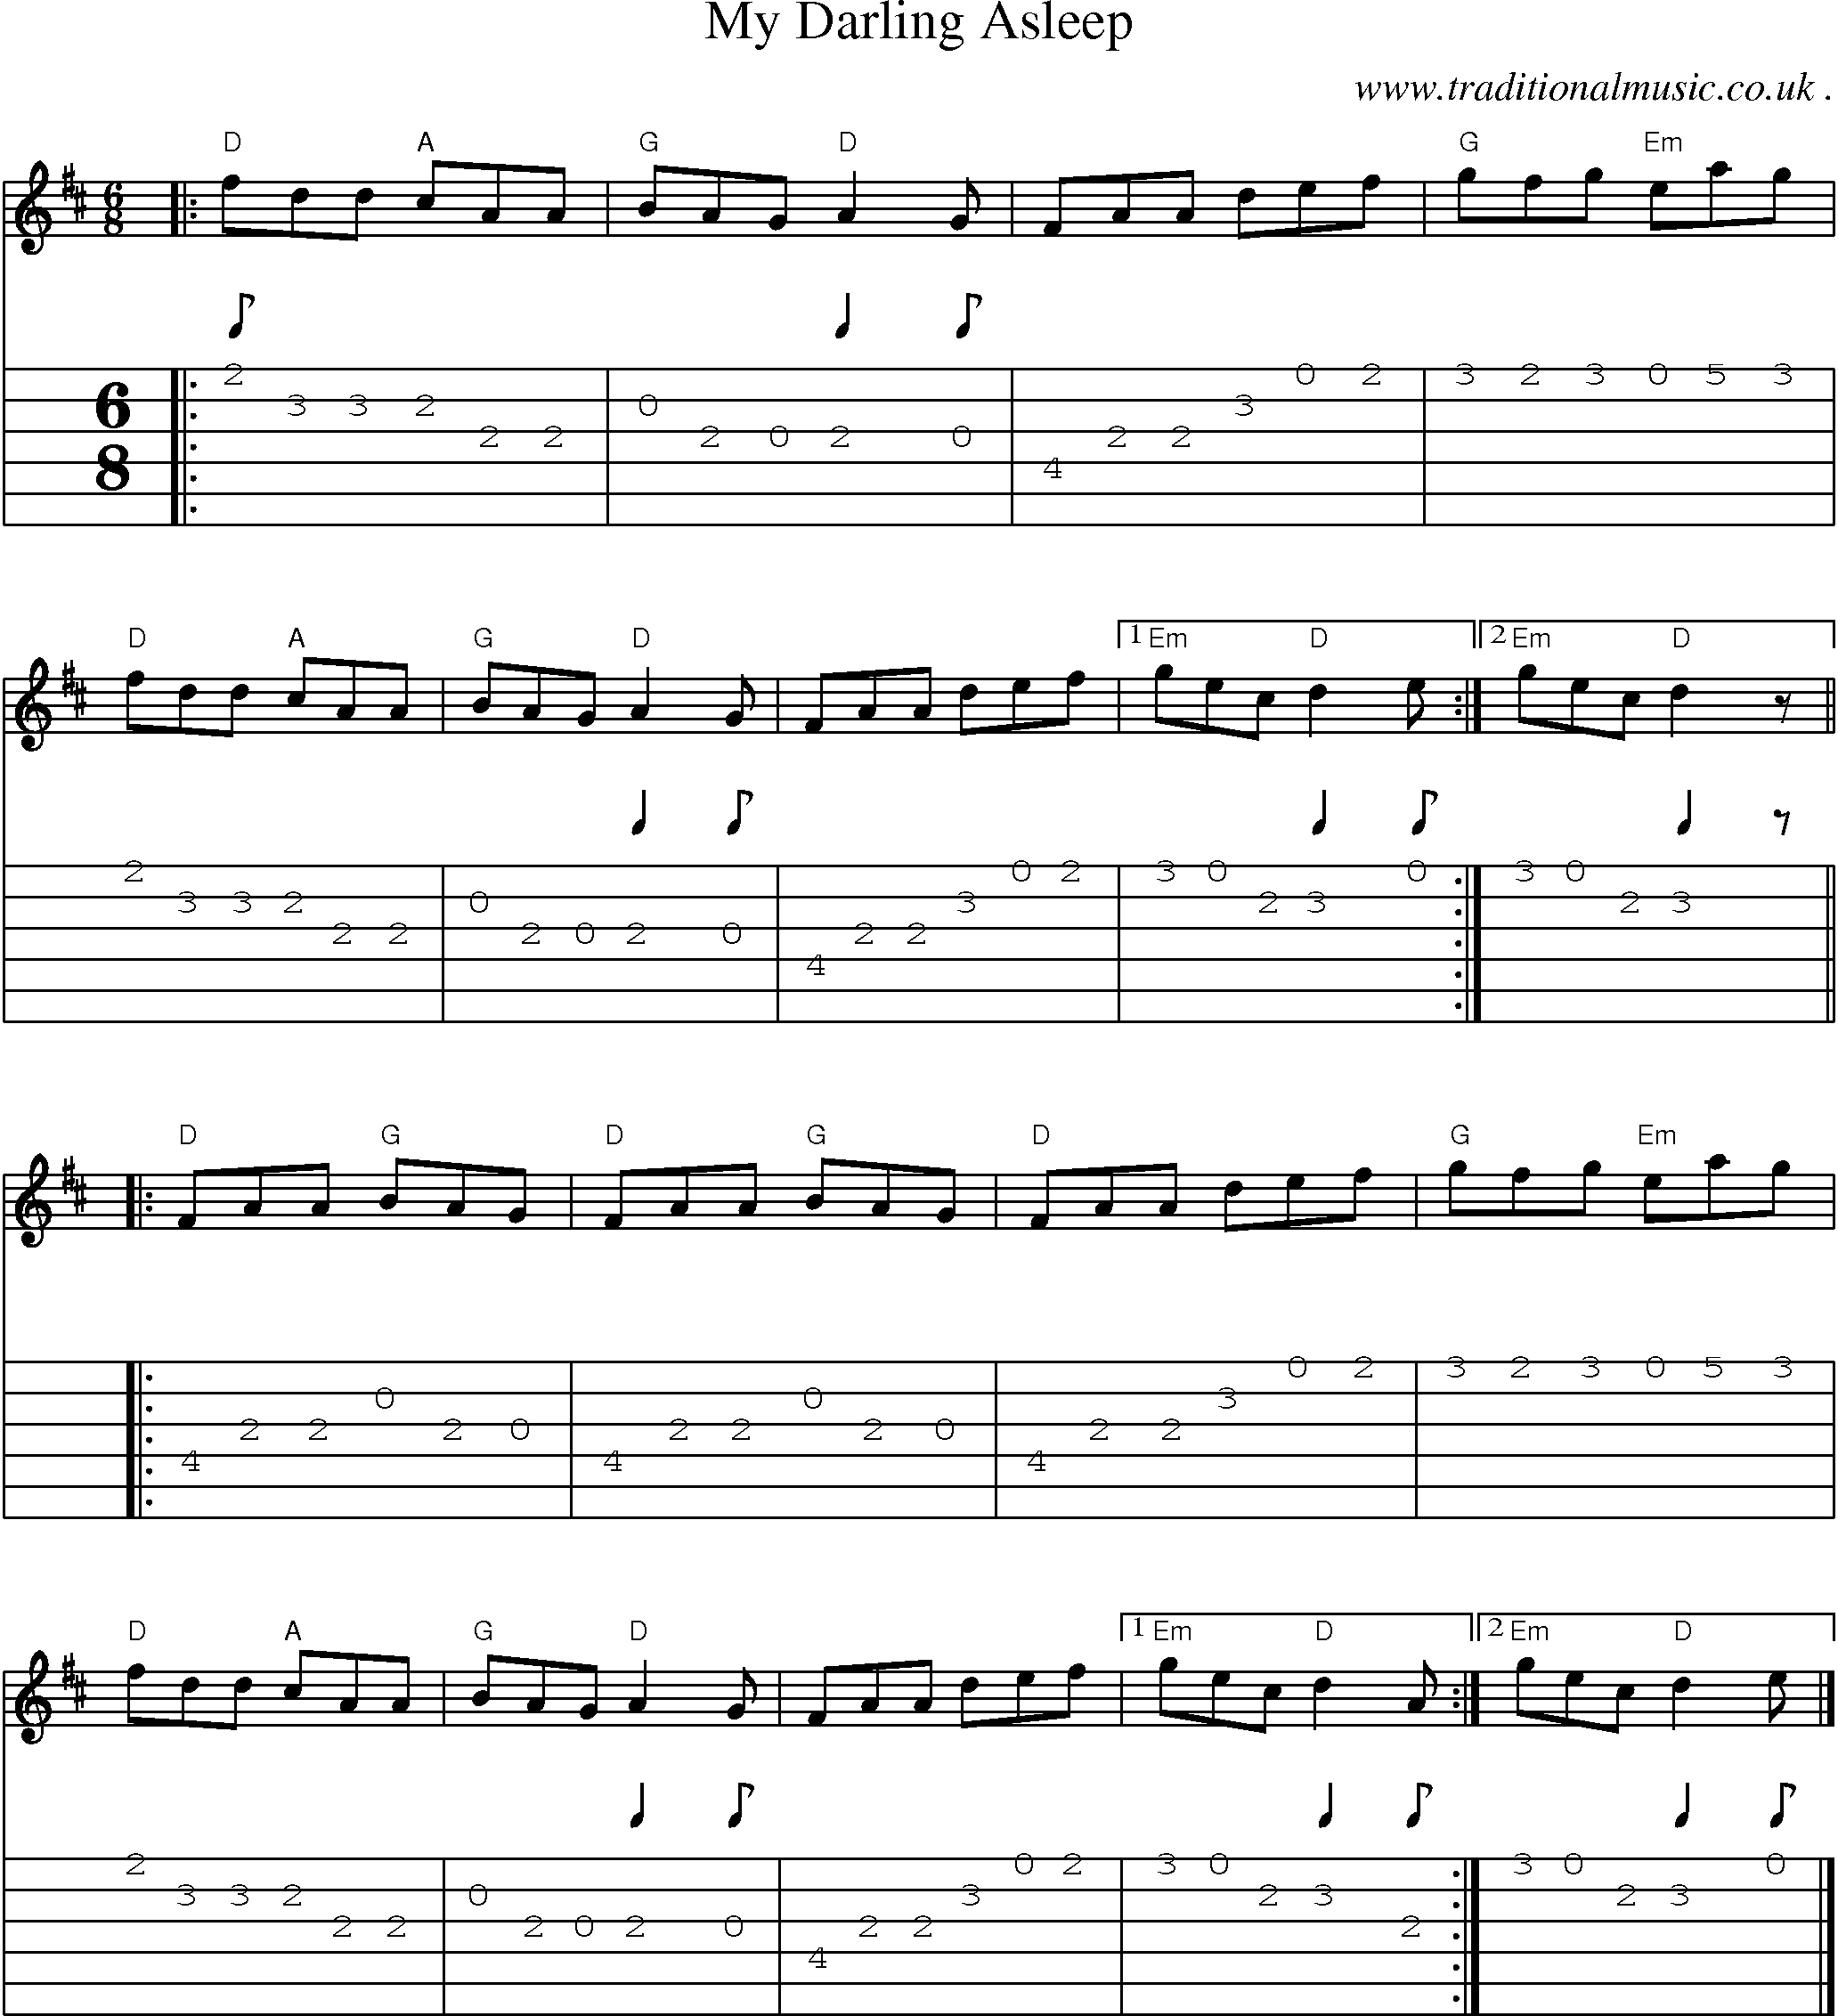 Sheet-music  score, Chords and Guitar Tabs for My Darling Asleep